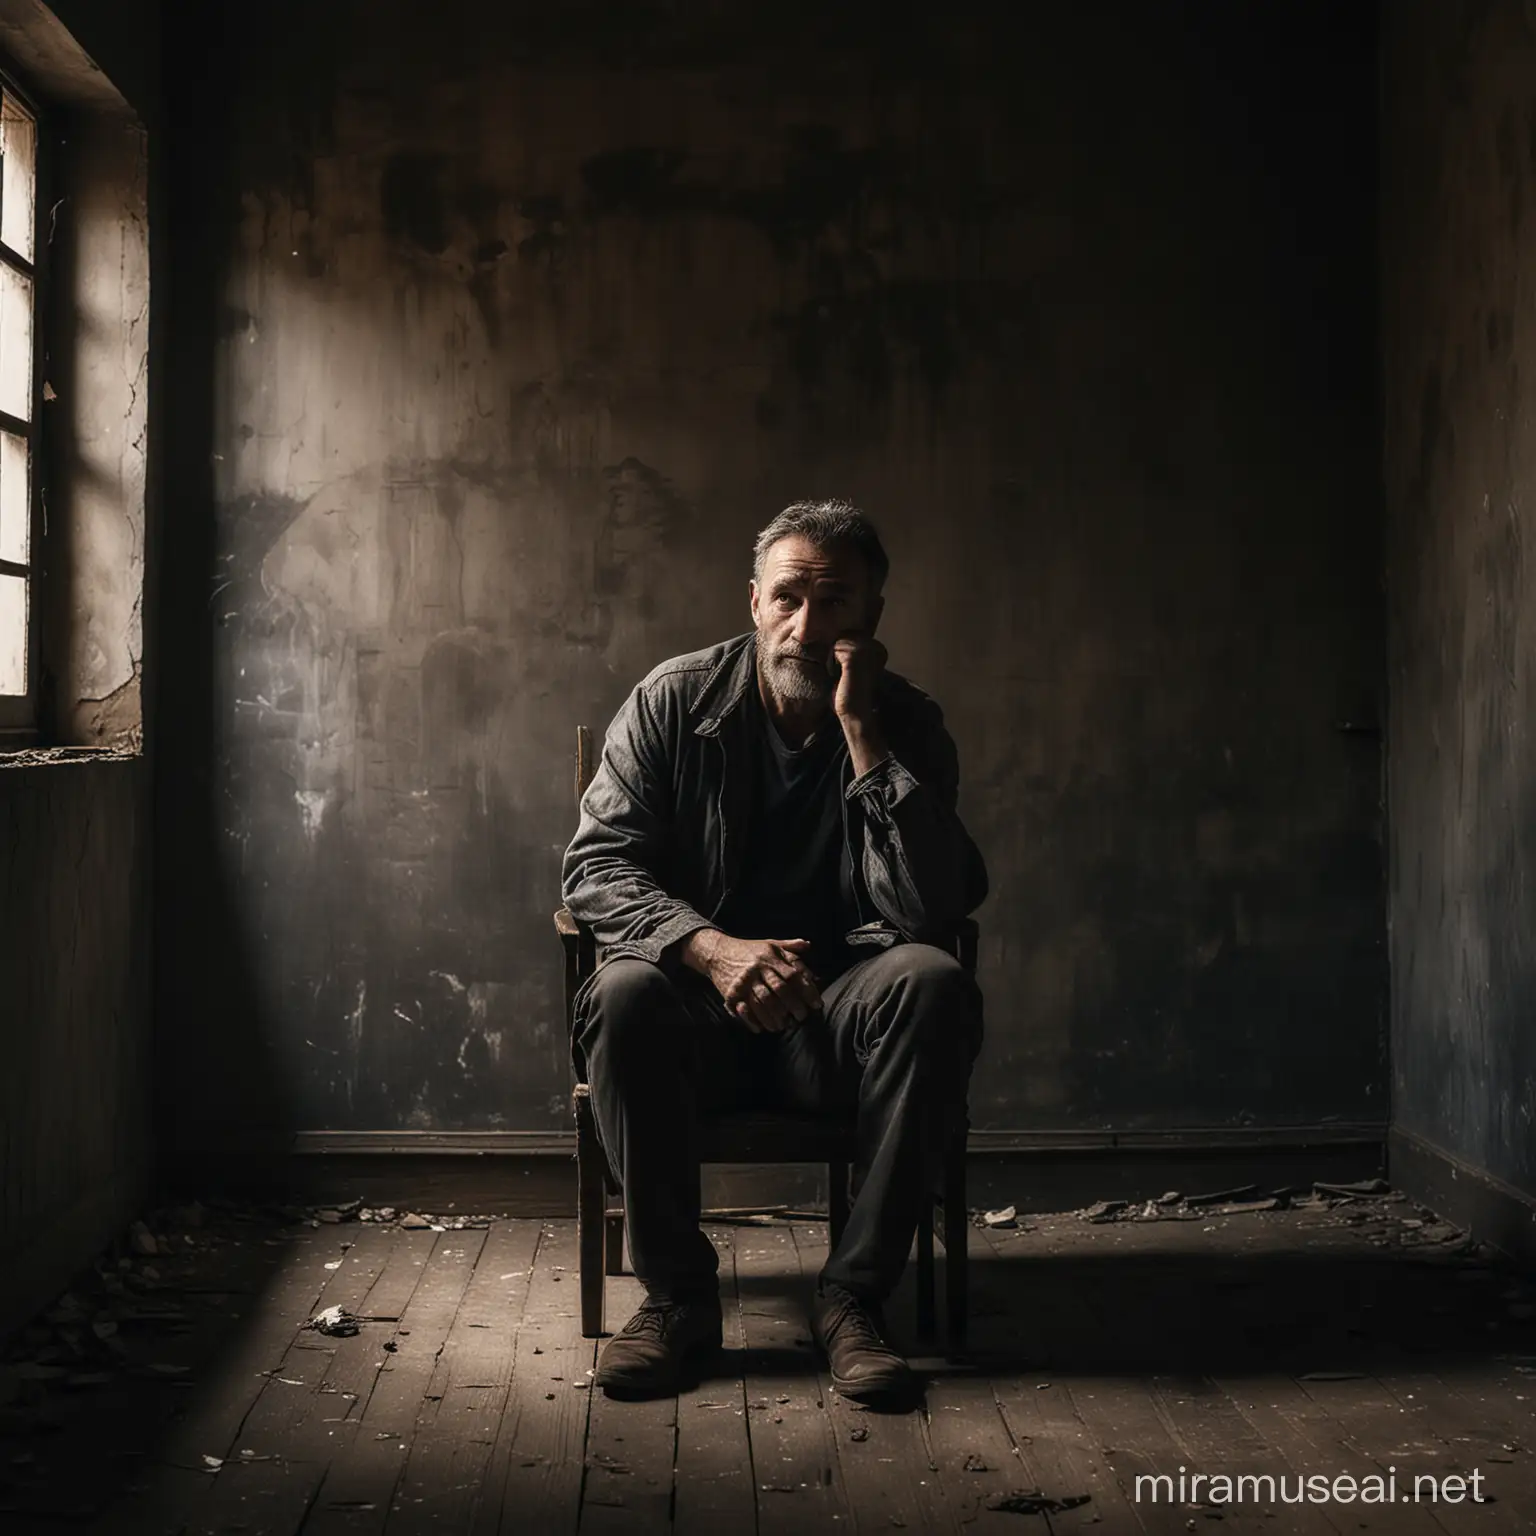 A man sitting on chair  he gives back to us in a dark and old-looking room.we saw the room walls with harsh texture 